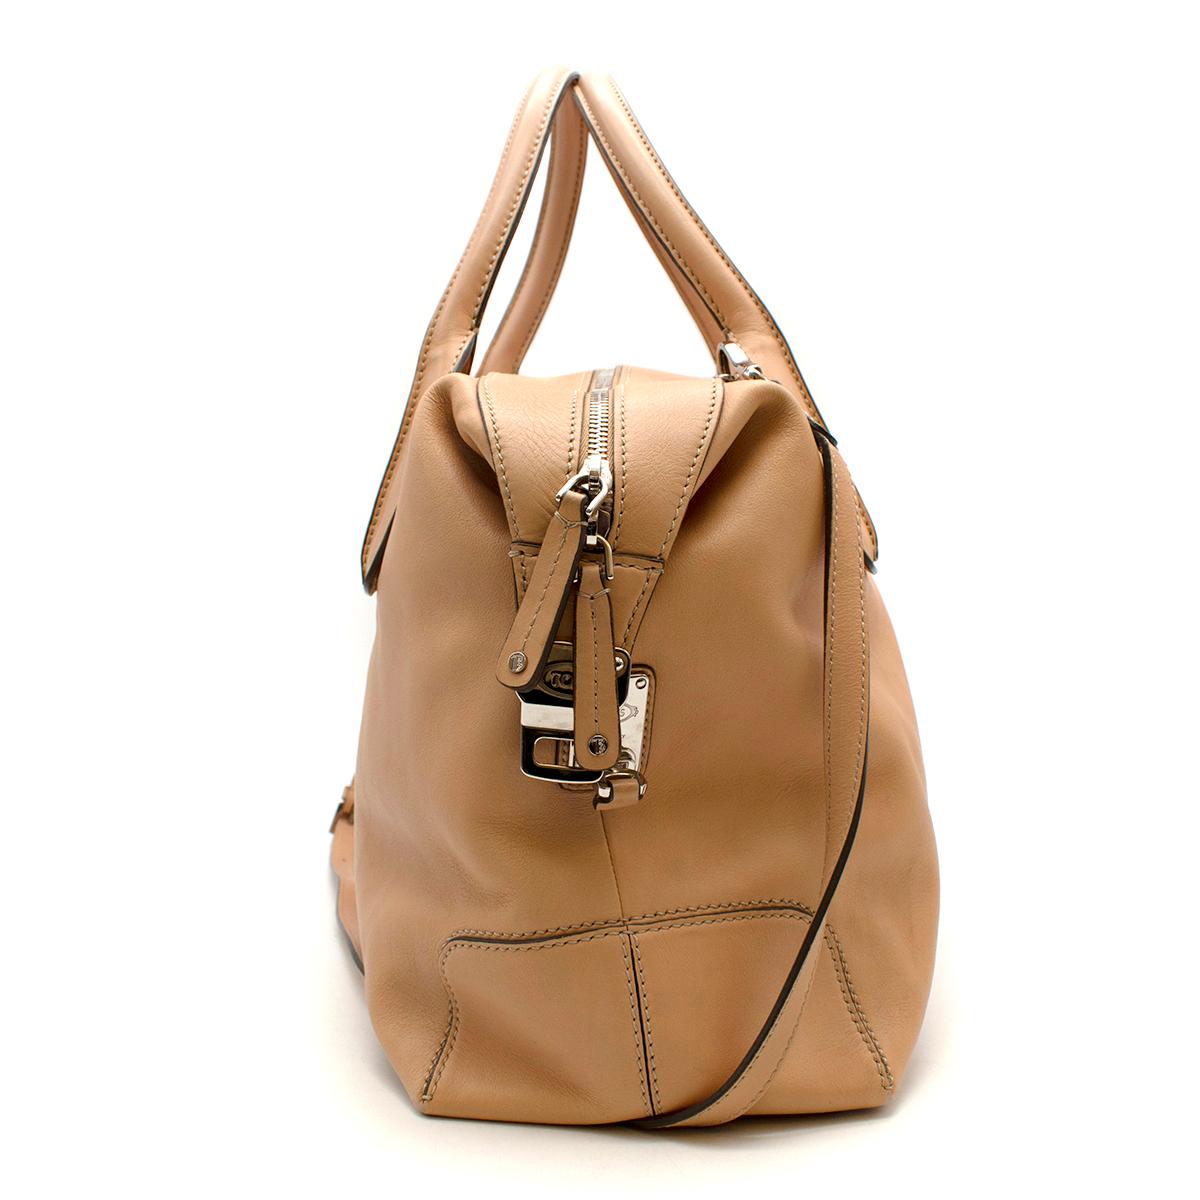 Tods Tan Leather D-Styling Tote Bag  

- Made of soft grained leather 
- Classic style 
- Twist locks to the sides 
- Top handles 
- Branded hardware 
- One zipped inner pocket
- Neutral tan hue 
- Timeless versatile design 

Materials:
leather